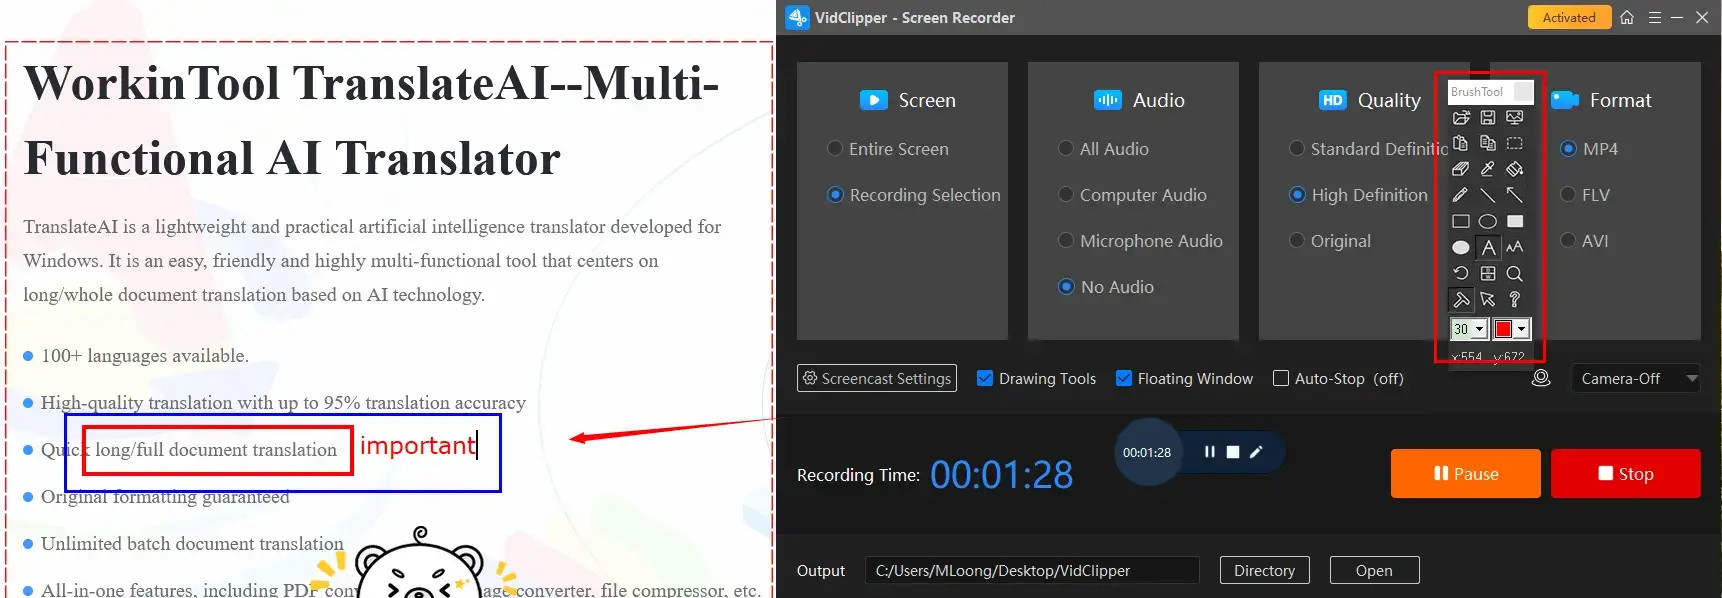 screen record firefox on windows in workintool capture screen recorder with drawing toolbar